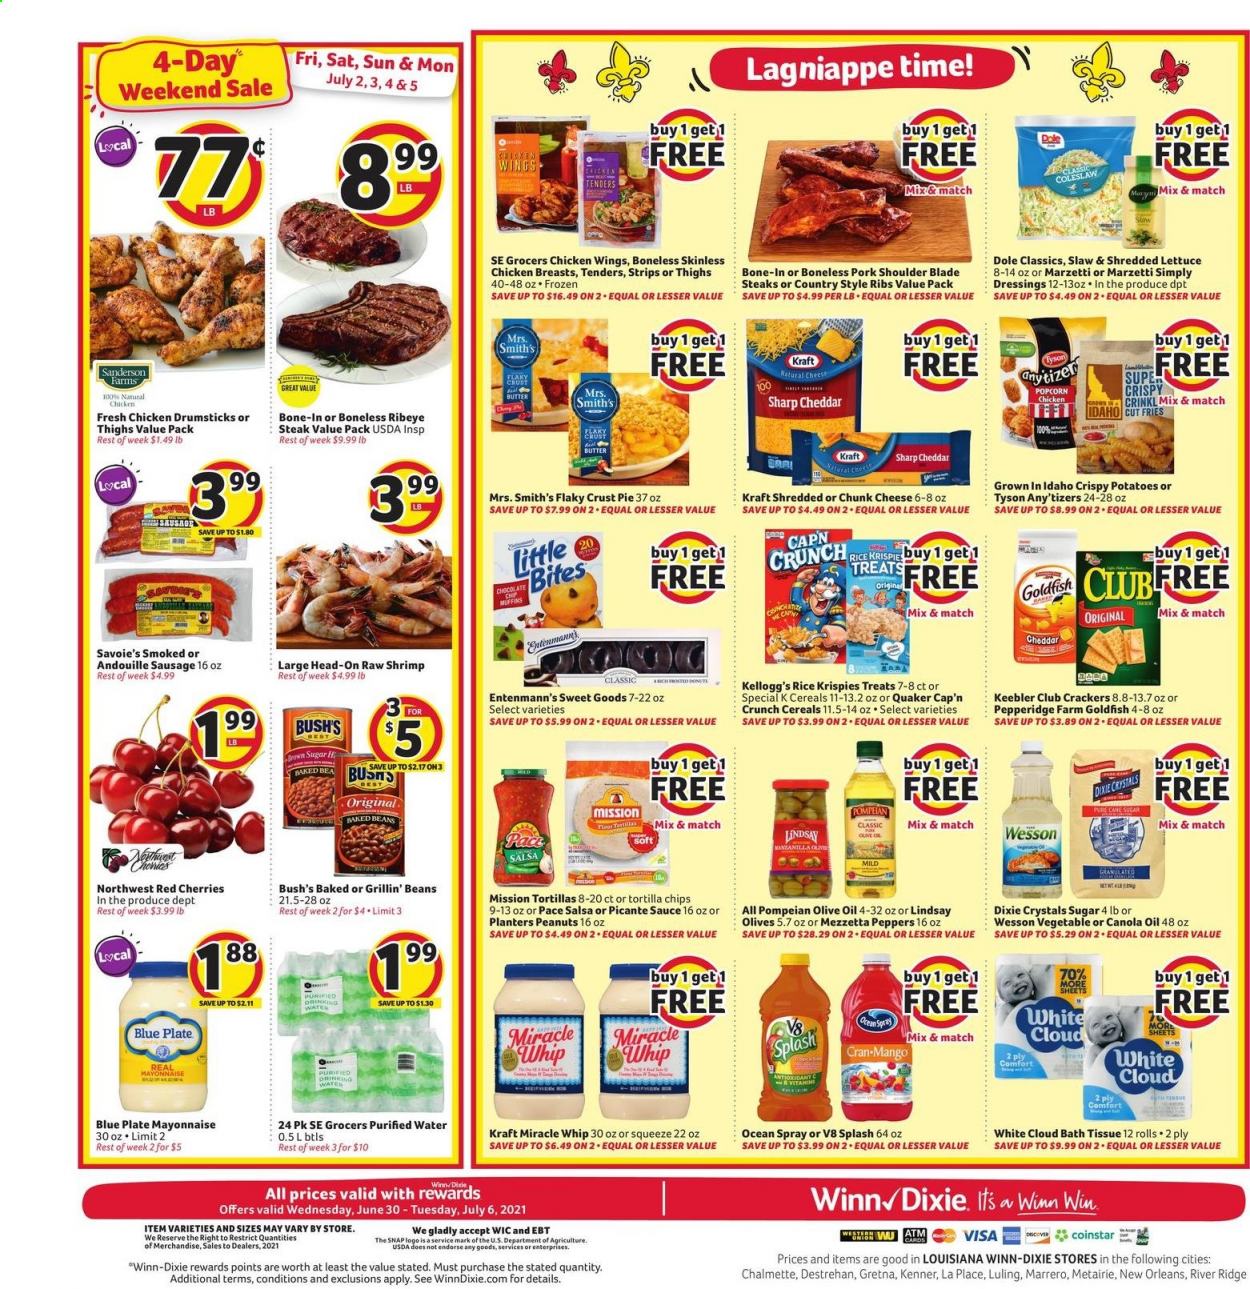 thumbnail - Winn Dixie Flyer - 06/30/2021 - 07/06/2021 - Sales products - pie, muffin, Entenmann's, beans, potatoes, lettuce, Dole, peppers, shredded lettuce, cherries, shrimps, coleslaw, sauce, Quaker, Kraft®, sausage, cheese, chunk cheese, butter, mayonnaise, Miracle Whip, chicken wings, strips, potato fries, chocolate, crackers, Kellogg's, Little Bites, Keebler, tortilla chips, Smith's, popcorn, Goldfish, cane sugar, olives, baked beans, cereals, Rice Krispies, Cap'n Crunch, salsa, canola oil, olive oil, oil, peanuts, Planters, purified water, chicken breasts, chicken drumsticks, beef meat, beef steak, steak, ribeye steak, pork meat, pork ribs, pork shoulder, country style ribs, bath tissue, Comfort softener, plate. Page 20.